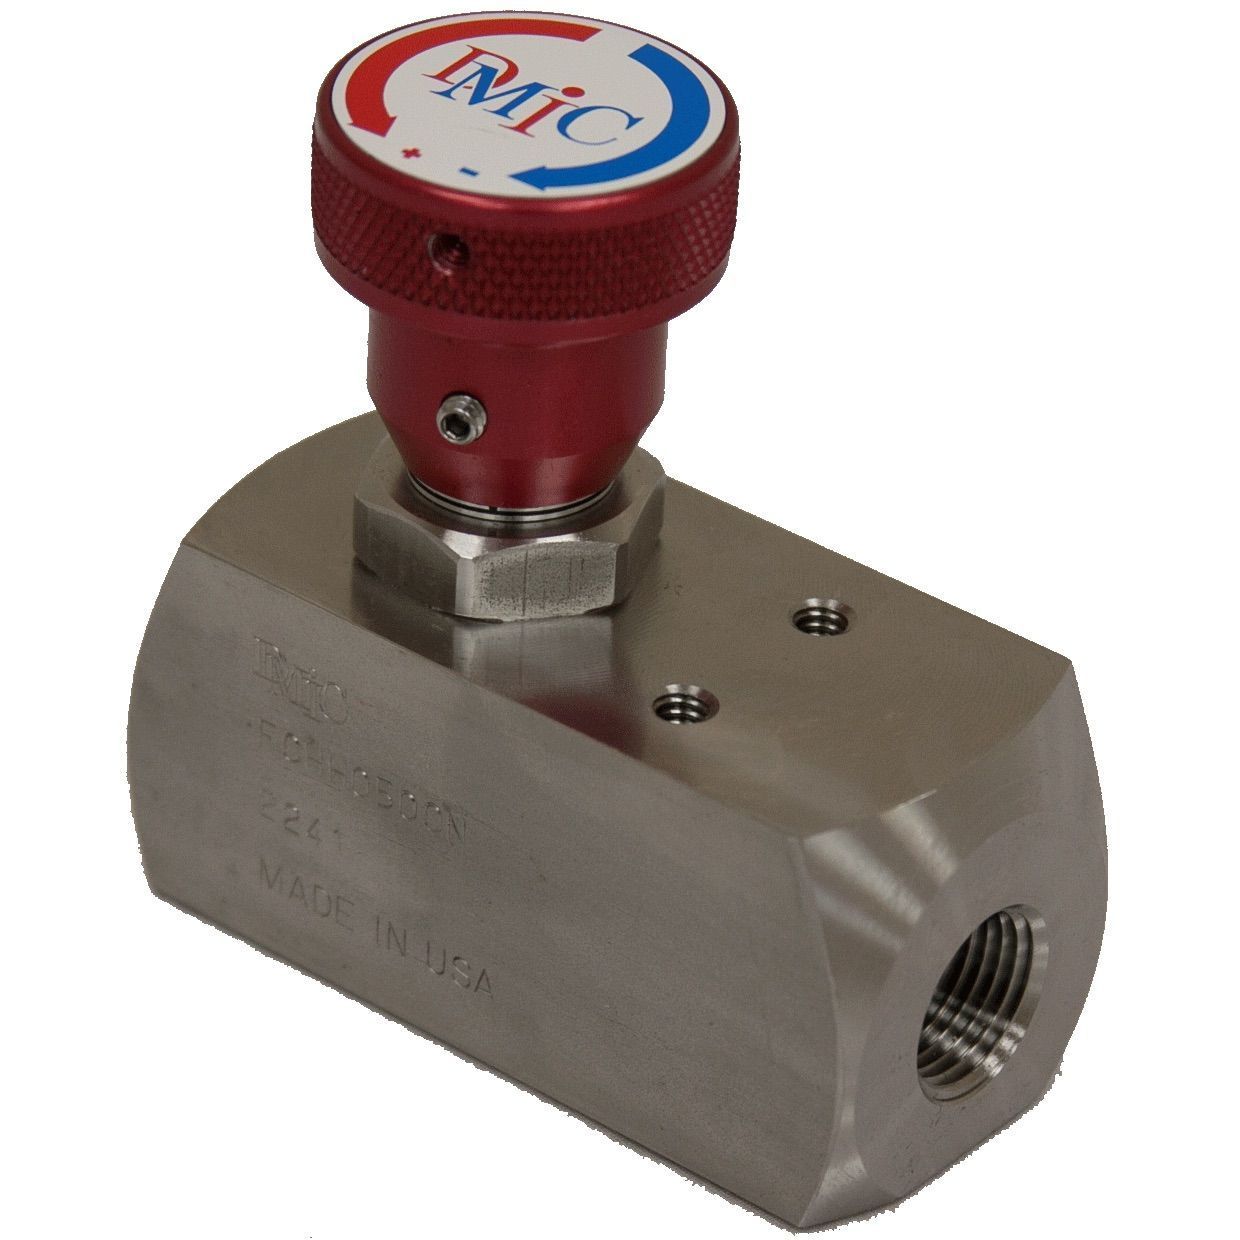 FCHH-1250S-2221 : DMIC Flow Control, Unidirectional, with Integrated Check, #20 SAE (1.25"), 316SS, 10000psi